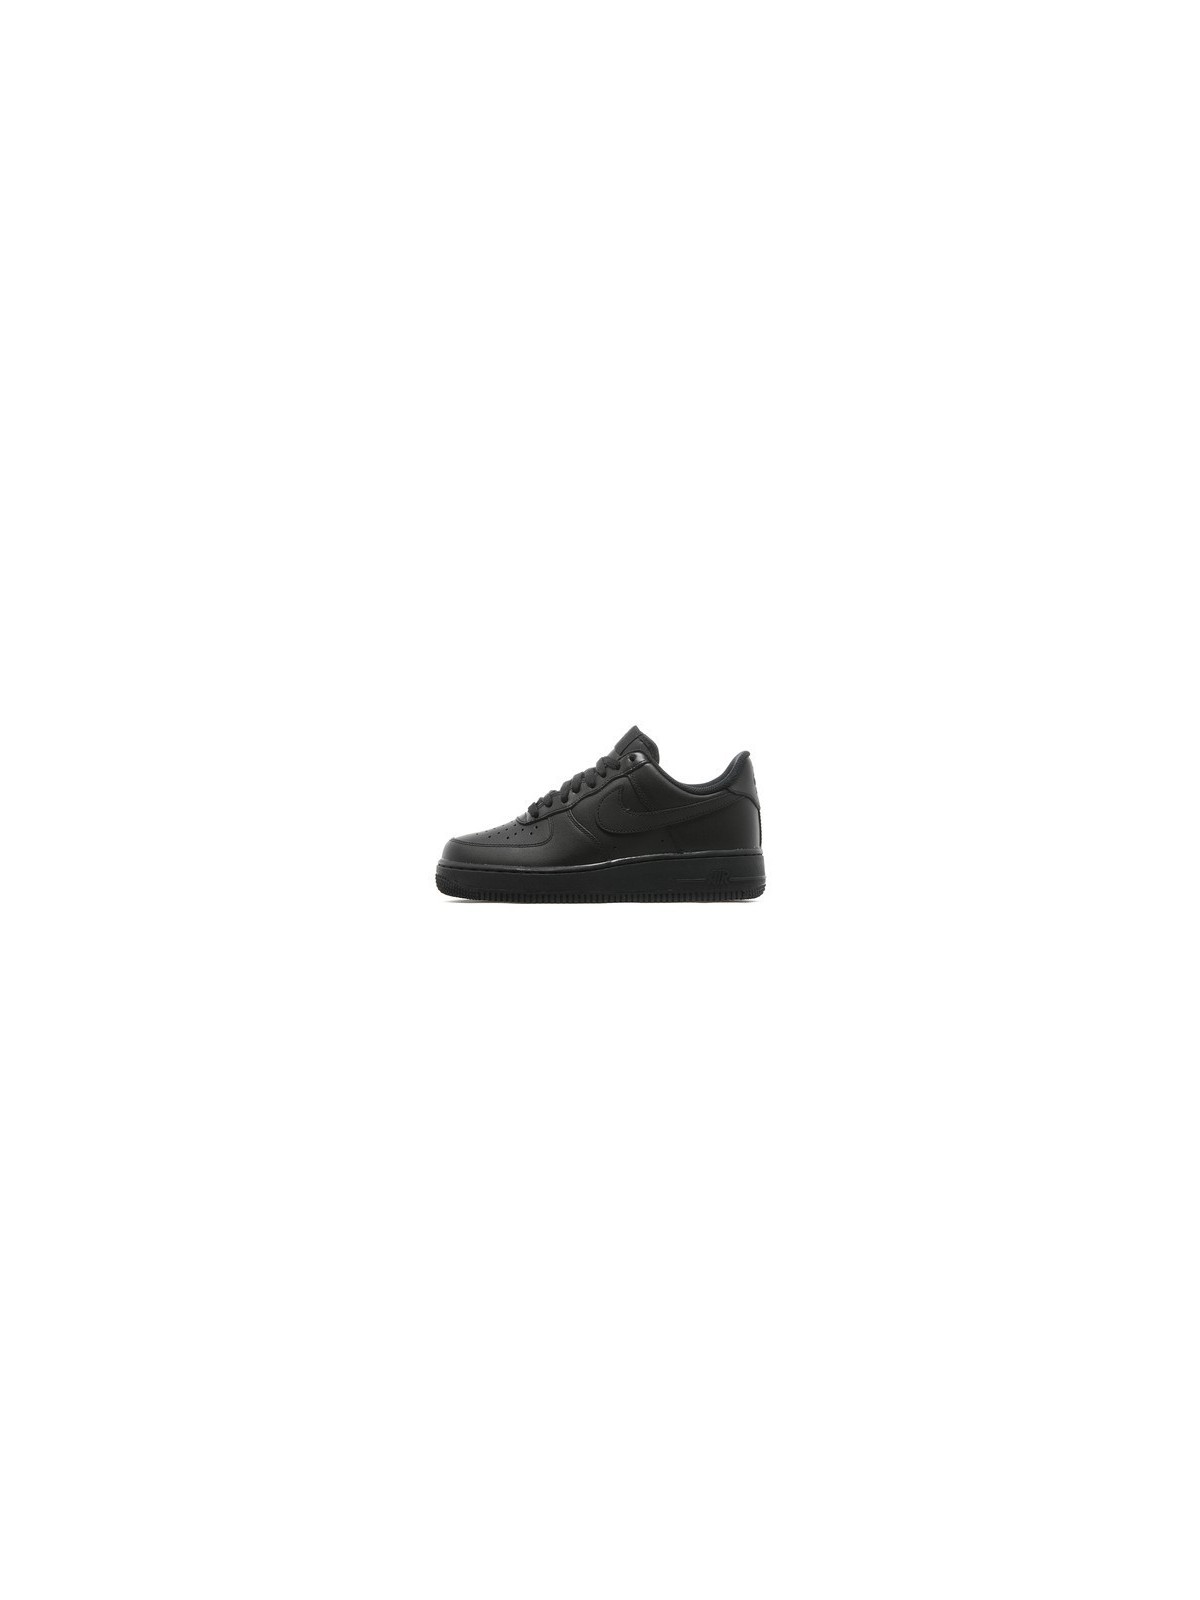 Air Force "One" LOW NEGRAS